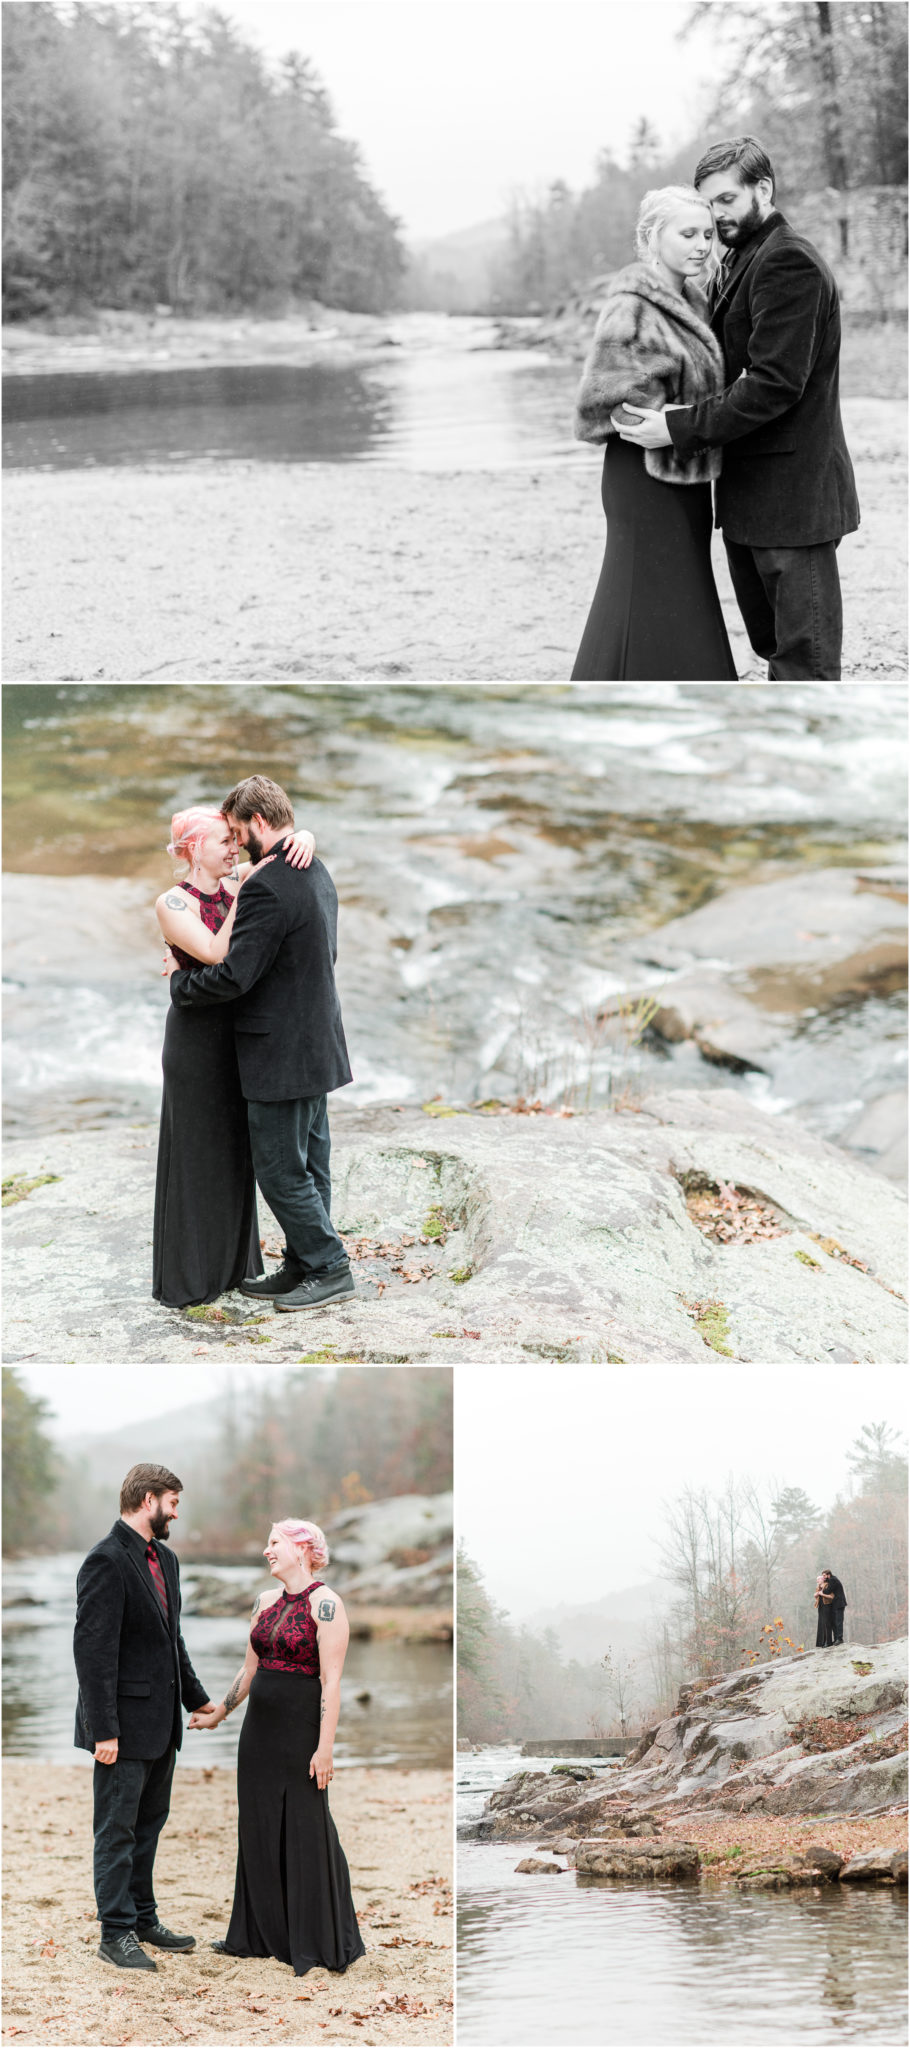 Brown Mountain Beach Resort Engagement Session in Collettsville, NC